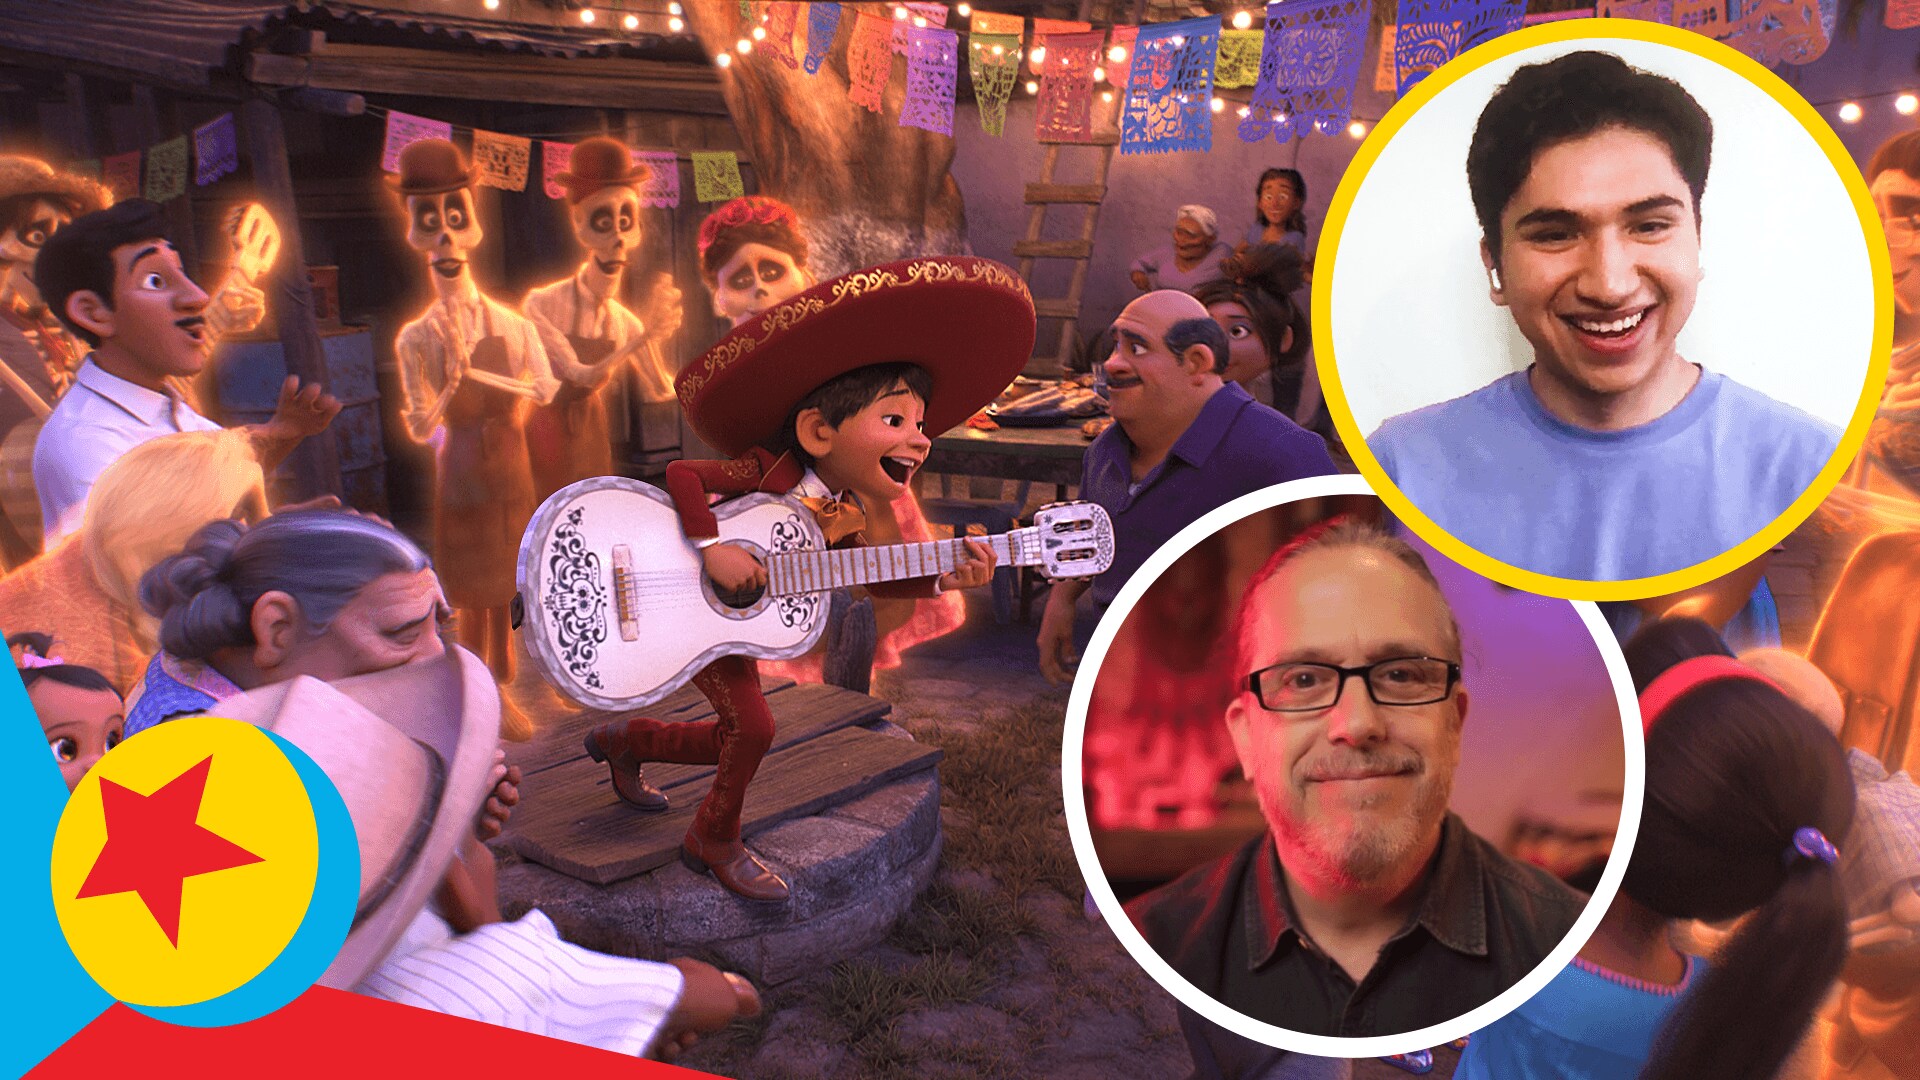 Celebrate Coco’s 5th Anniversary with Lee Unkrich and Anthony Gonzalez | Pixar